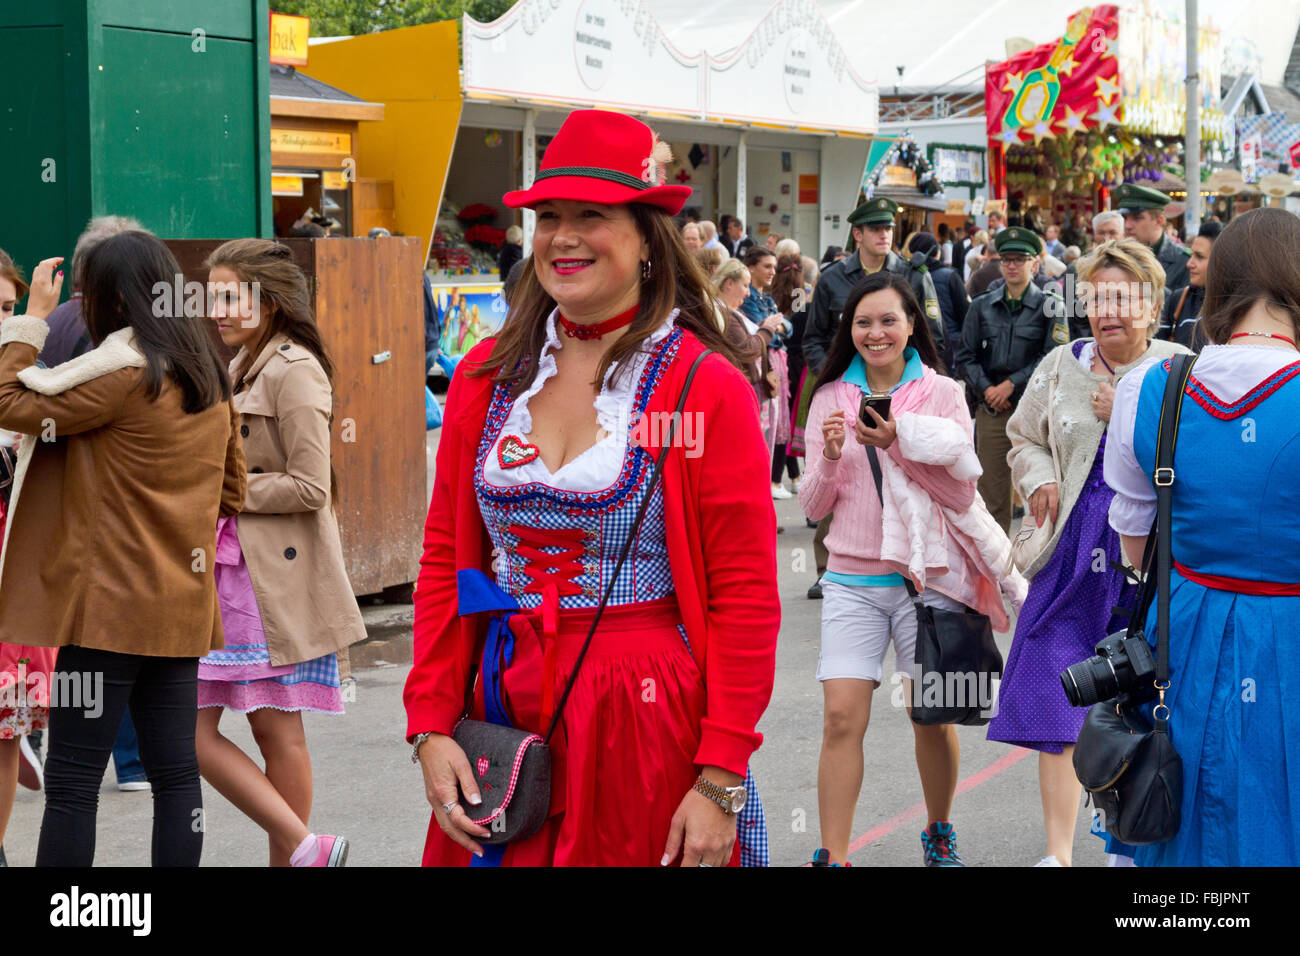 Smiling young women wearing dirndl and Tyrolean hat walking through crowd at Oktoberfest in Munich, Germany Stock Photo